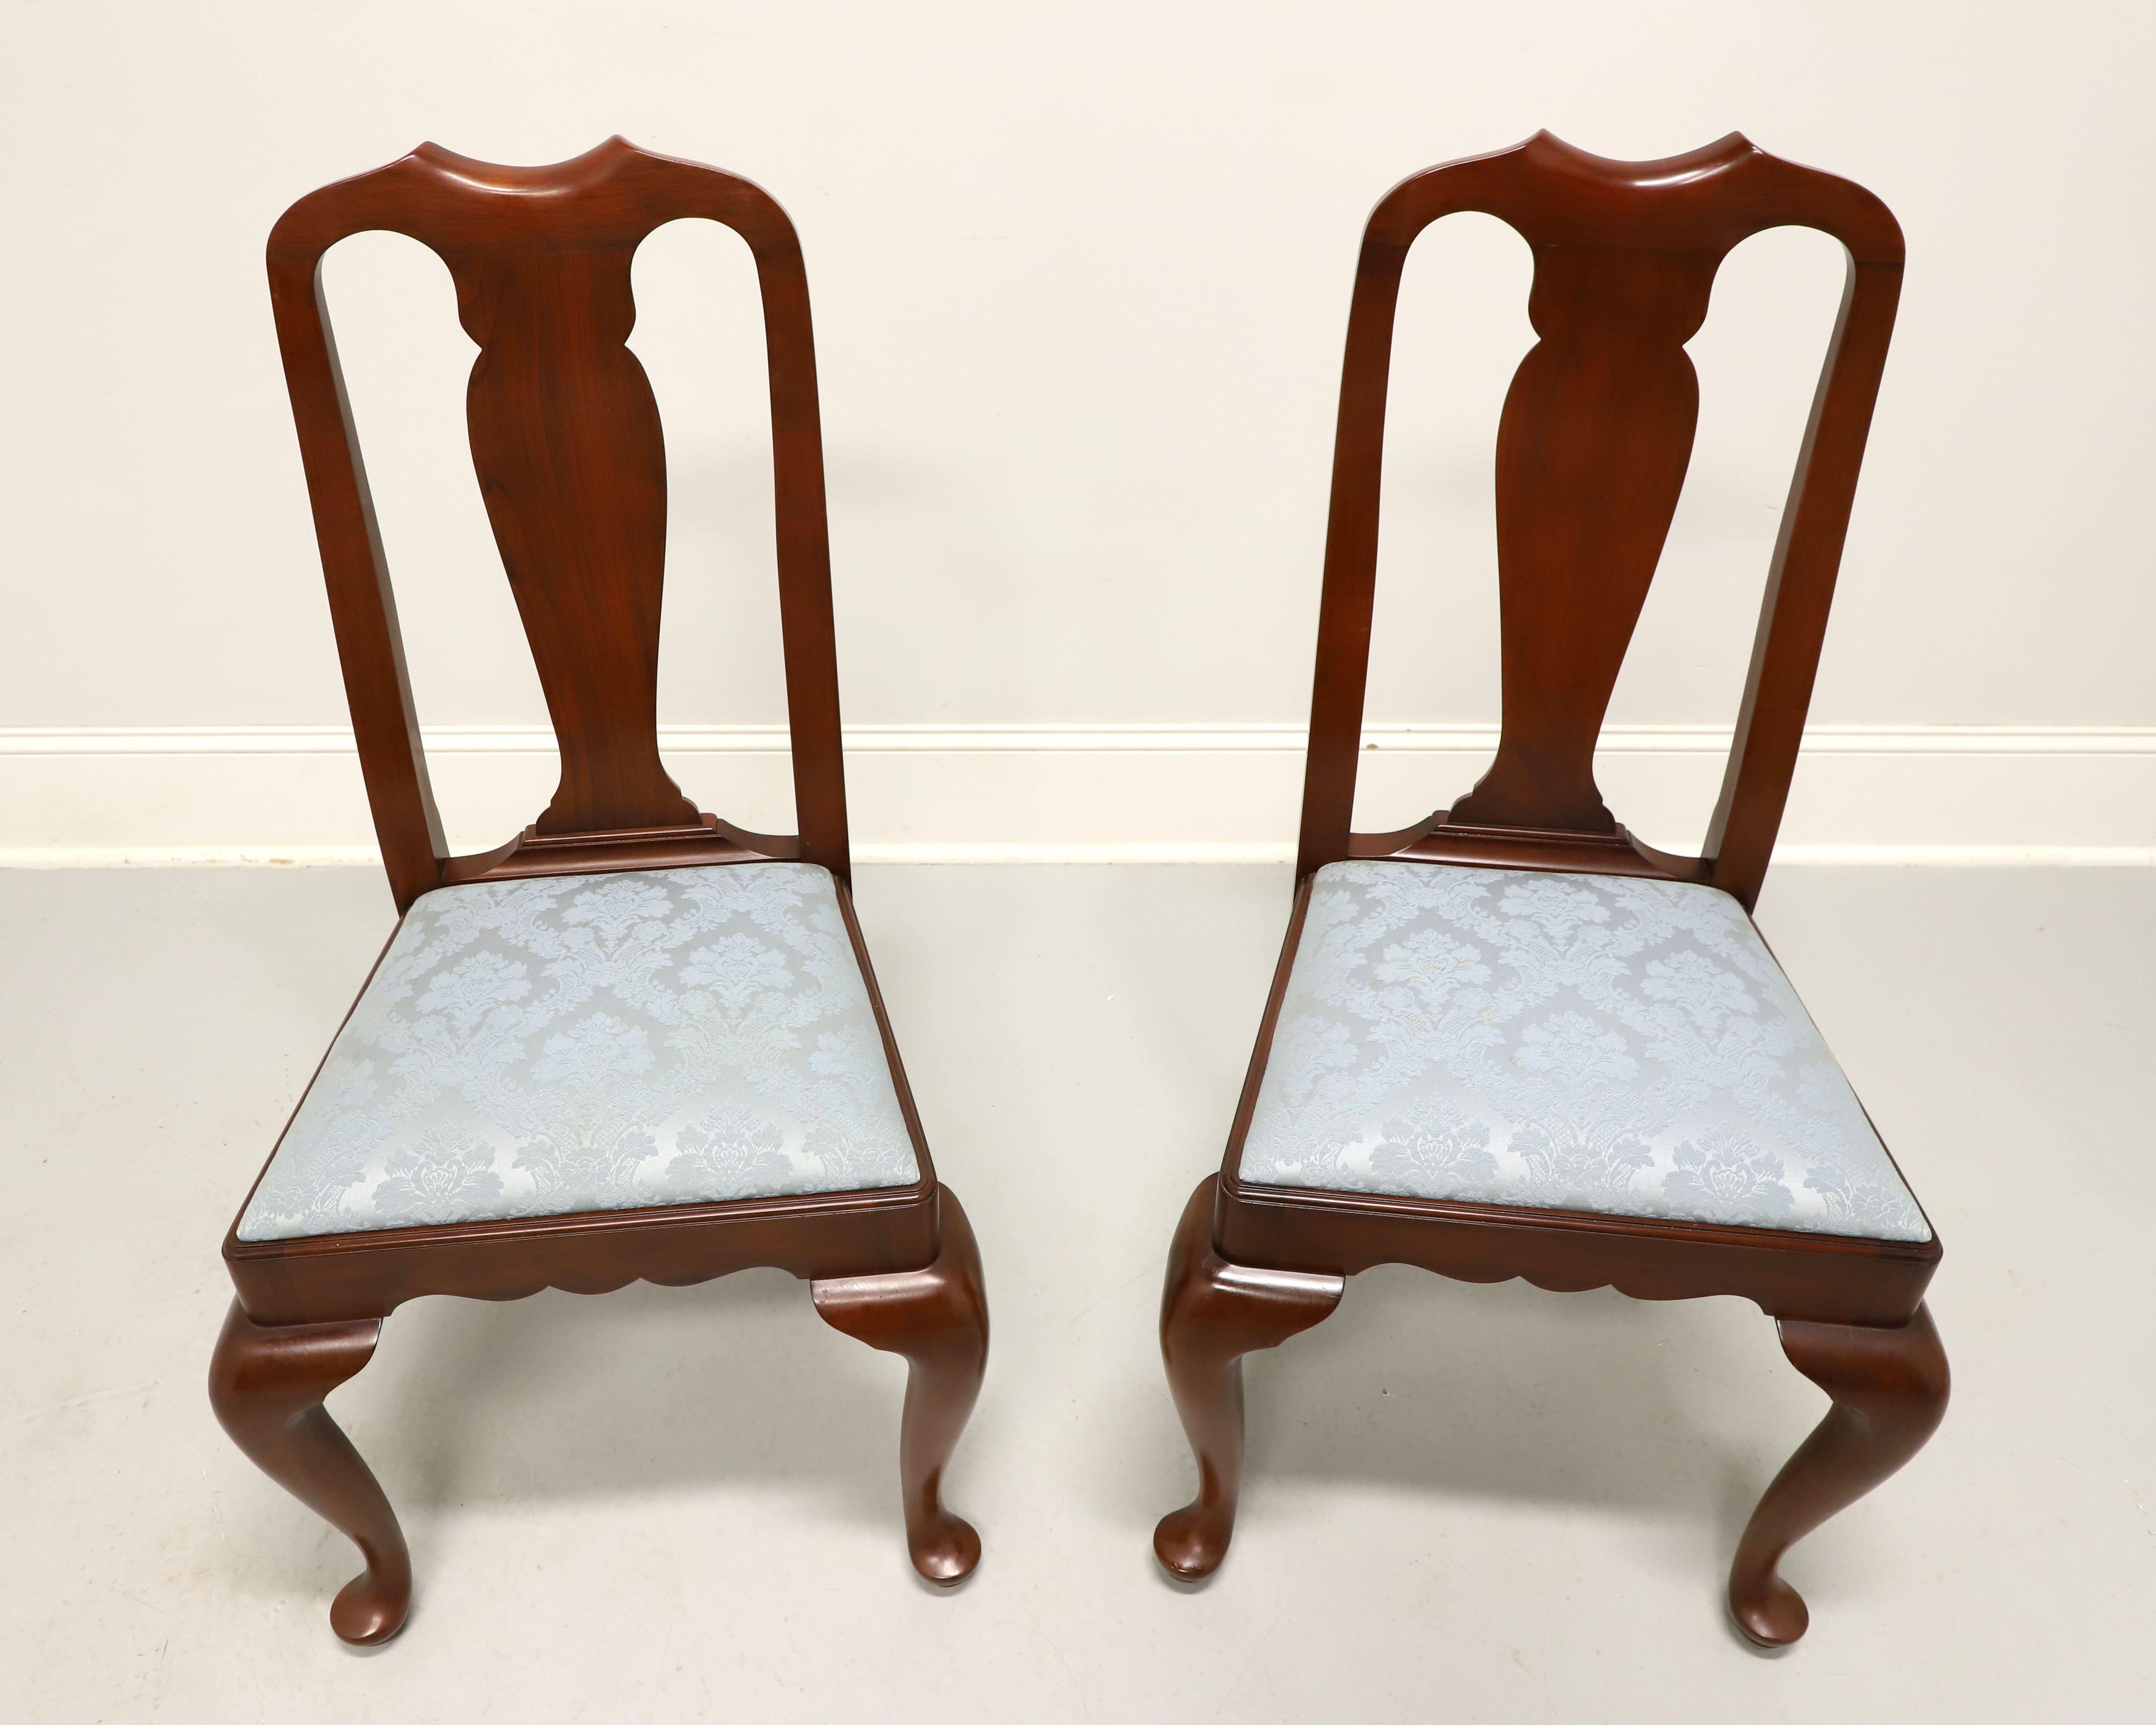 A pair of Queen Anne style dining side chairs by Henkel Harris, of Winchester, Virginia, USA. Solid wild black cherry wood, carved crest rail, carved center backrest, upholstered seat in a light blue brocade fabric, carved apron, cabriole legs and